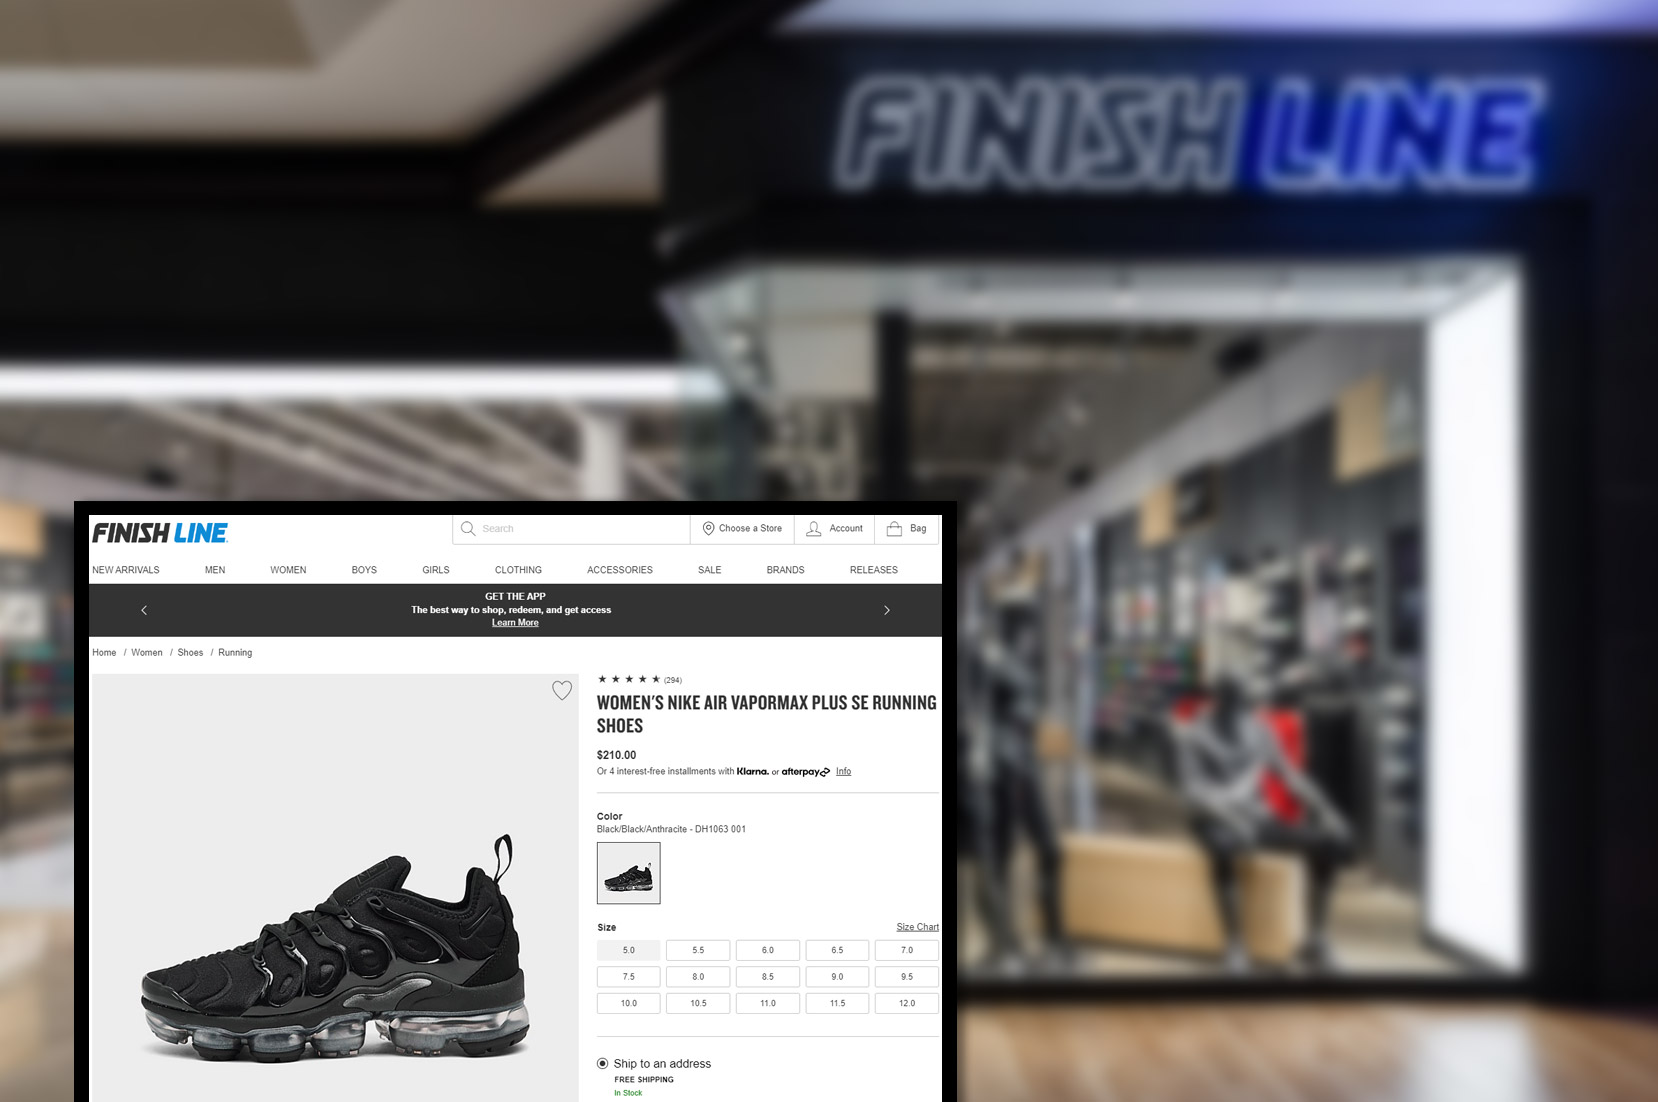 finishline-comproduct-pricing-information-and-image-scraping-services